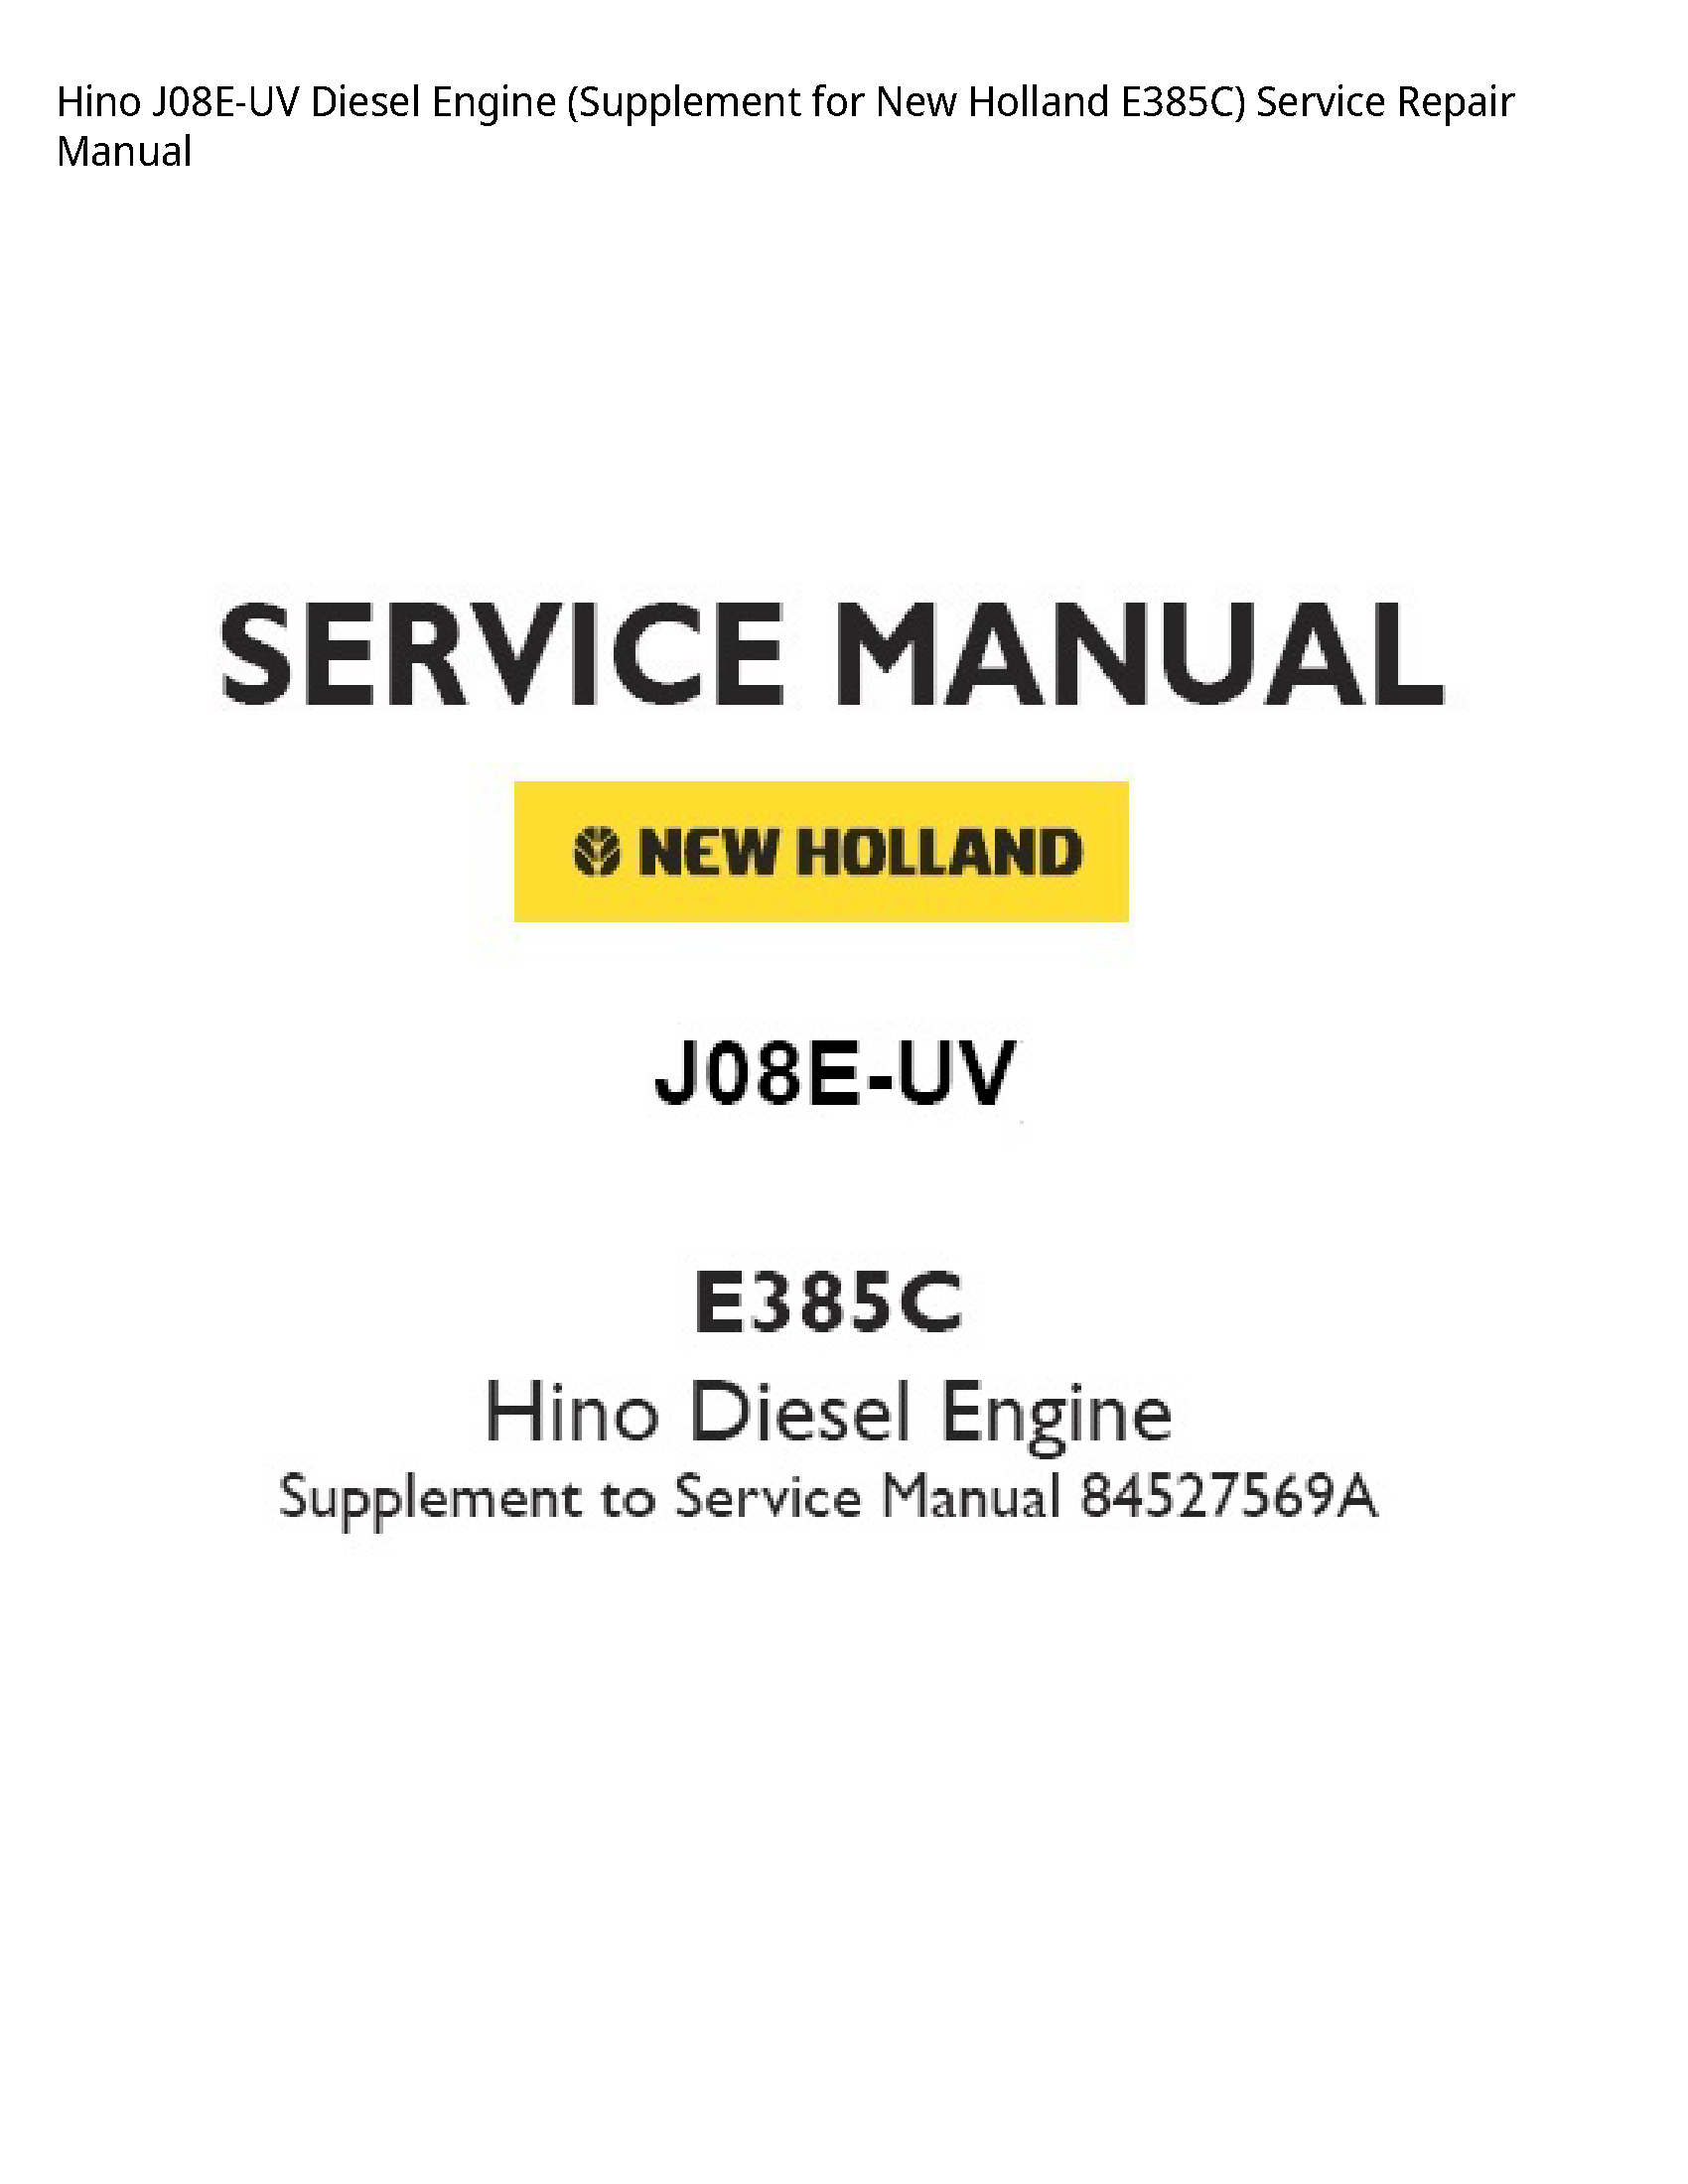 Hino J08E-UV Diesel Engine Supplement for New Holland manual